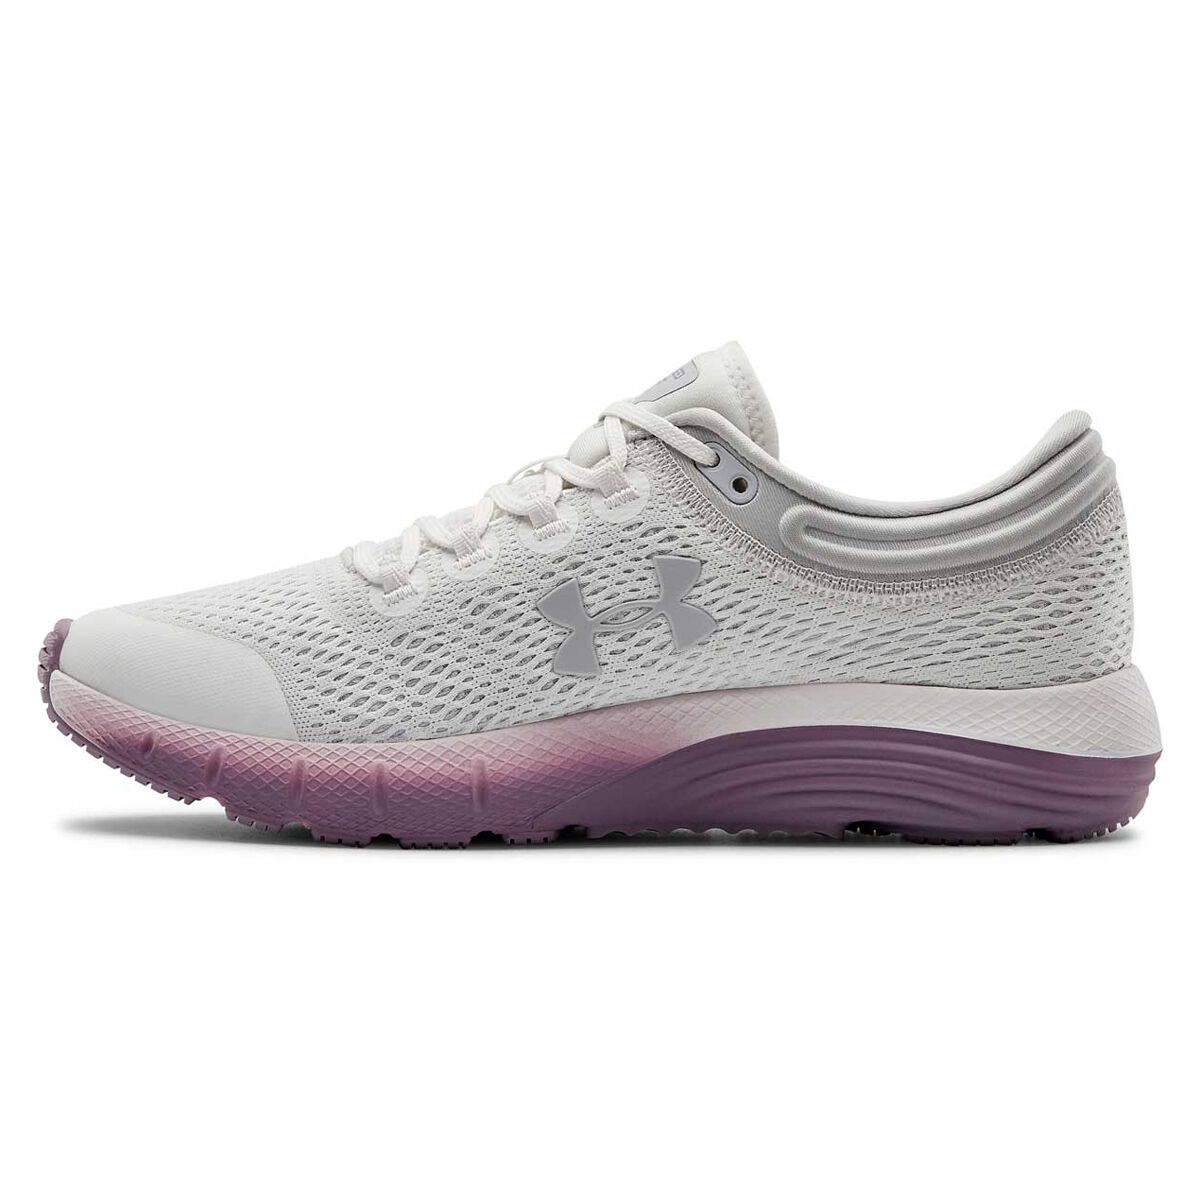 Under Armour Charged Bandit 5 Womens 